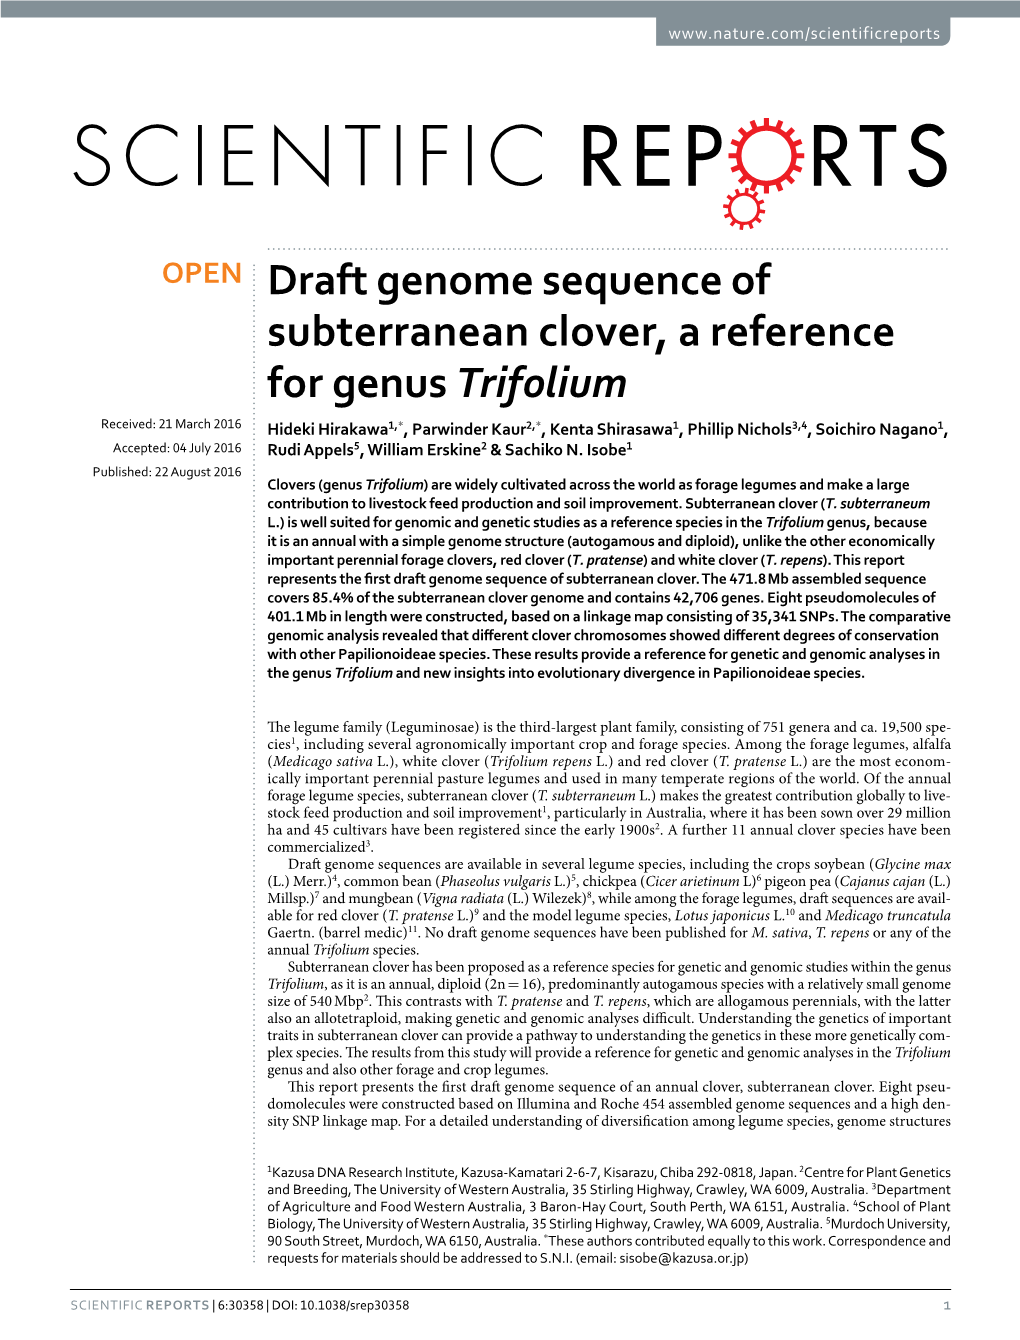 Draft Genome Sequence of Subterranean Clover, a Reference For